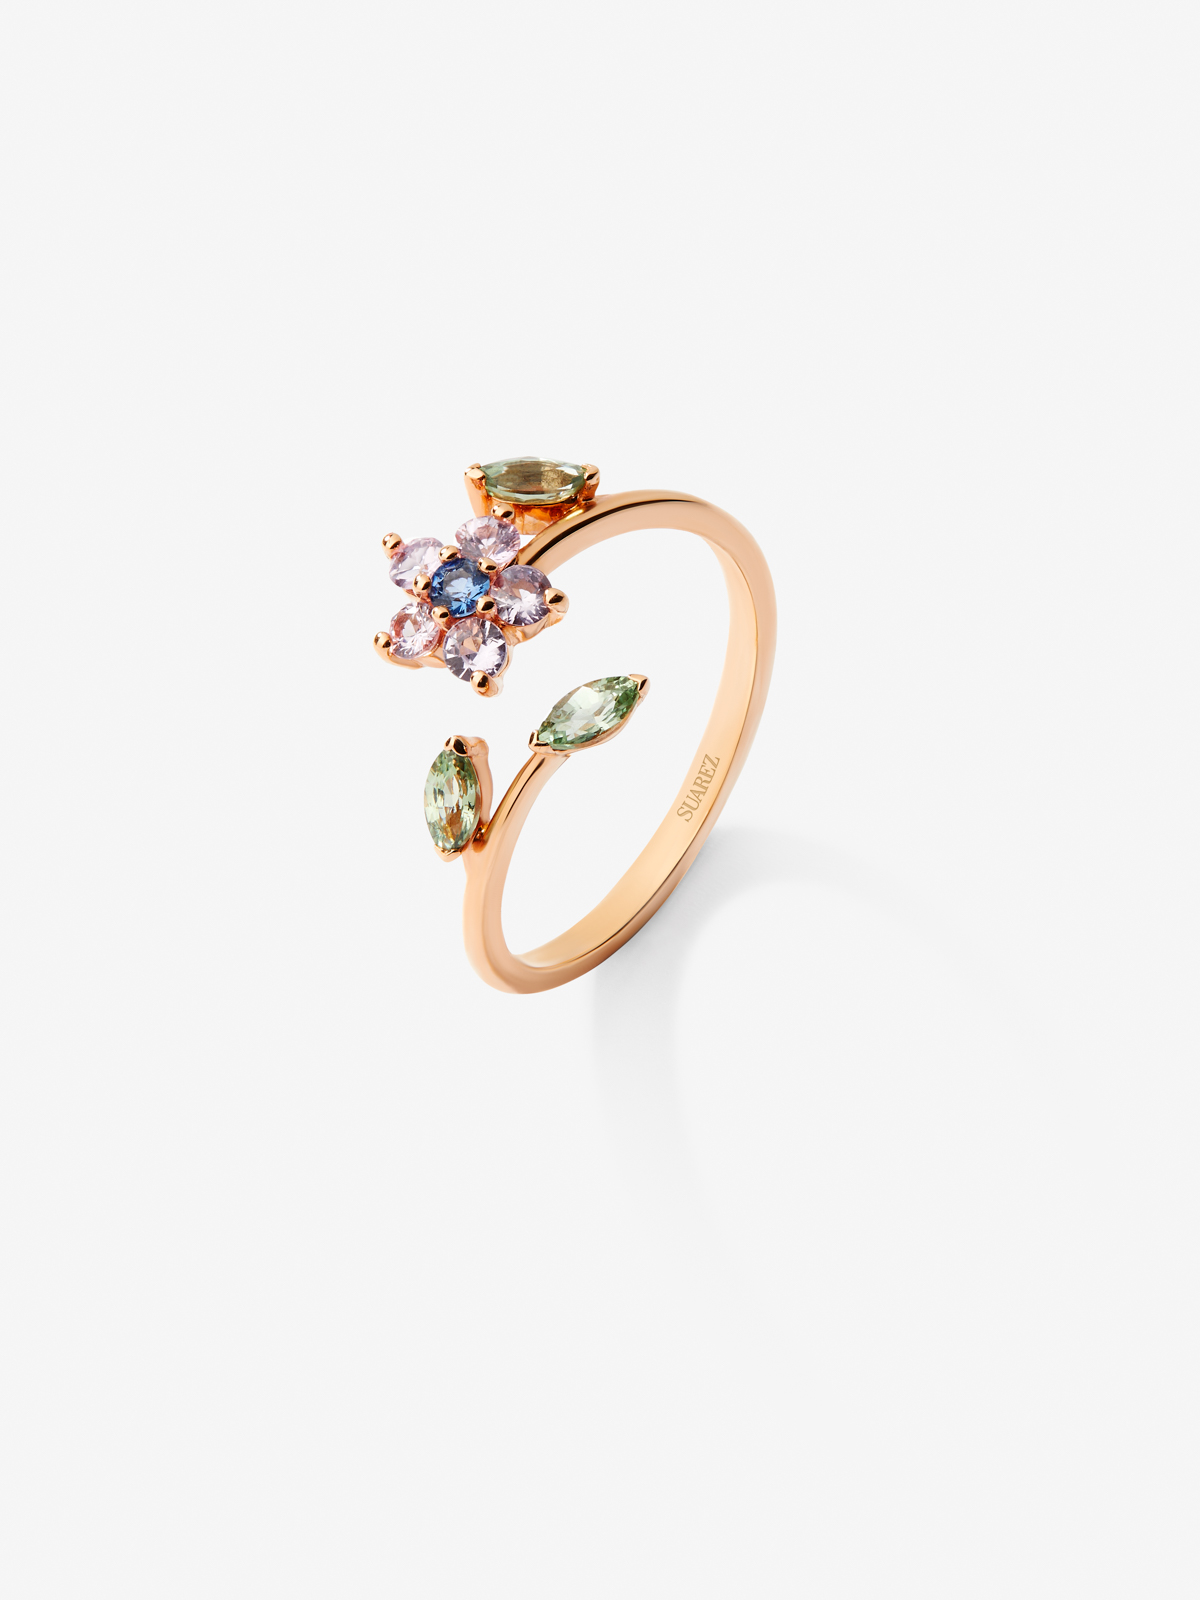 18K rose gold ring with pink, green and blue sapphires in bright size and 0.55 cts